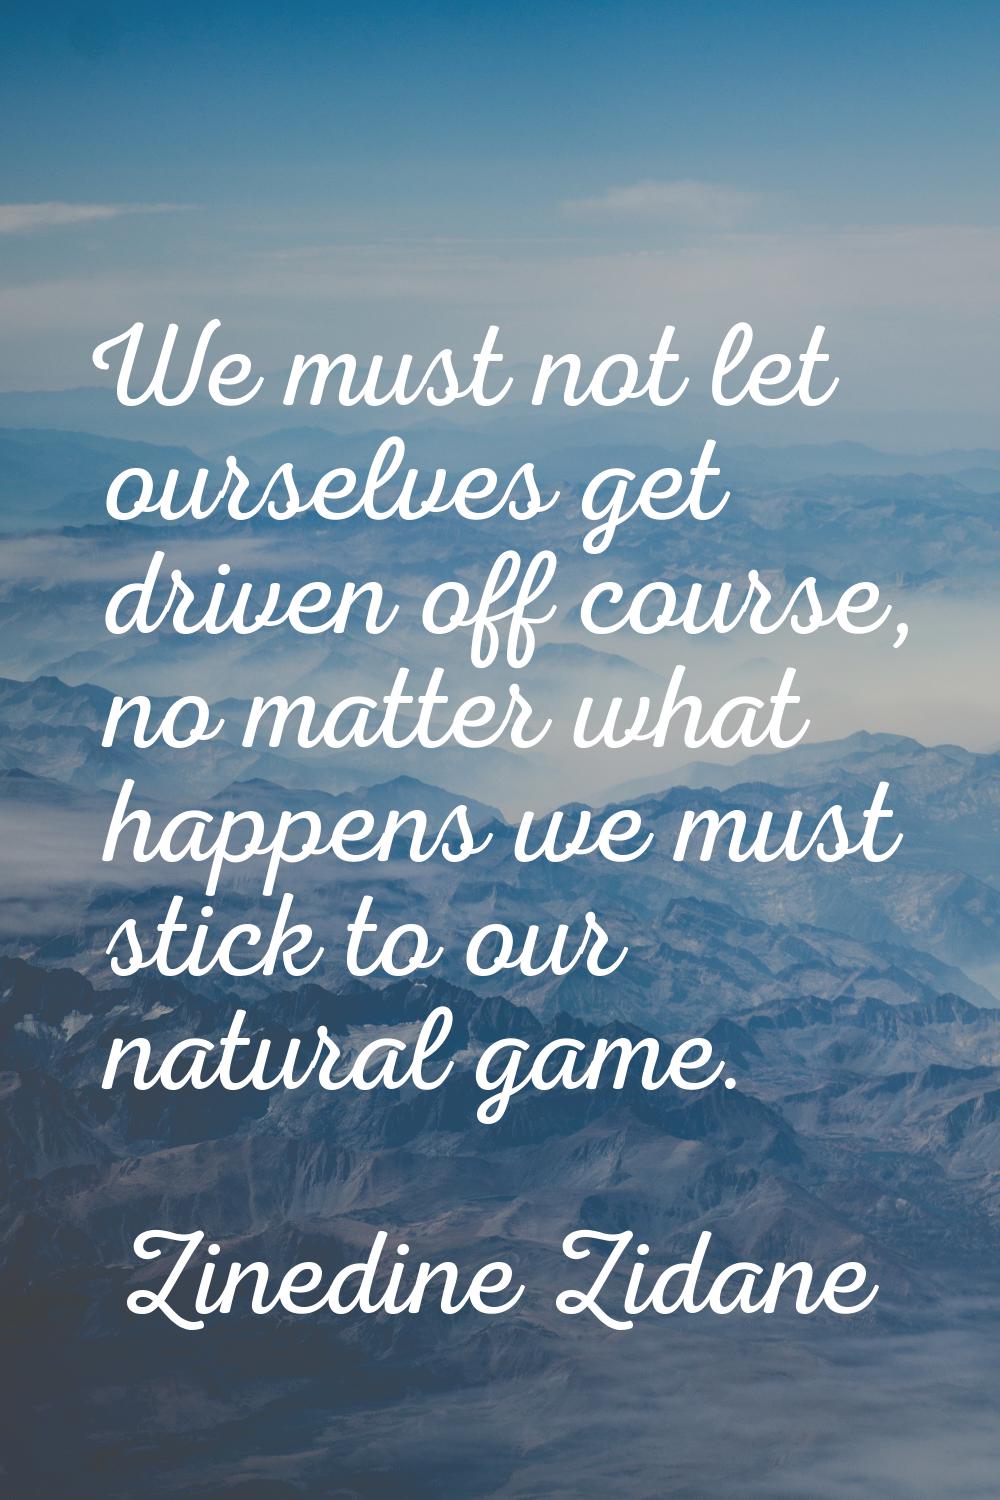 We must not let ourselves get driven off course, no matter what happens we must stick to our natura